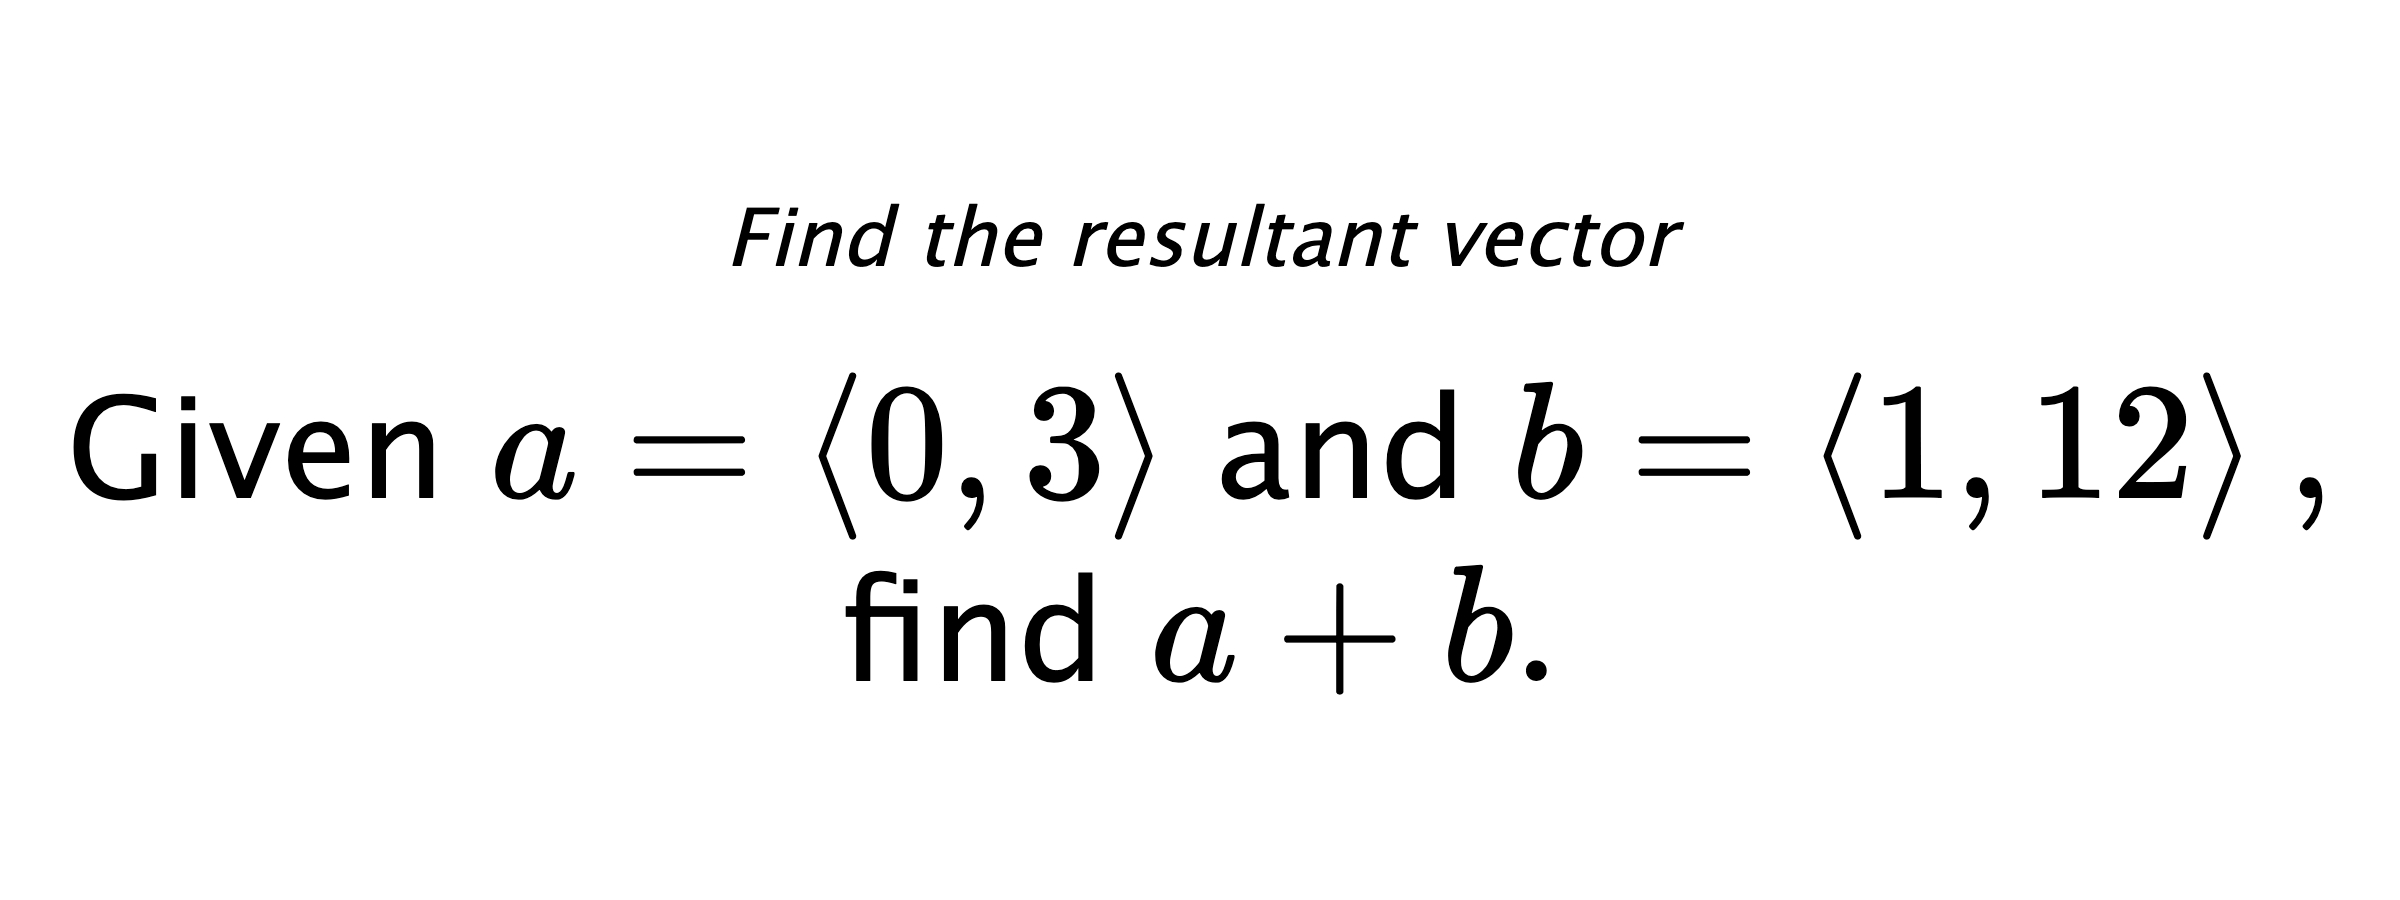 Find the resultant vector Given $ a = \left< 0,3 \right> $ and $ b = \left< 1,12 \right> ,$ find $ a+b .$